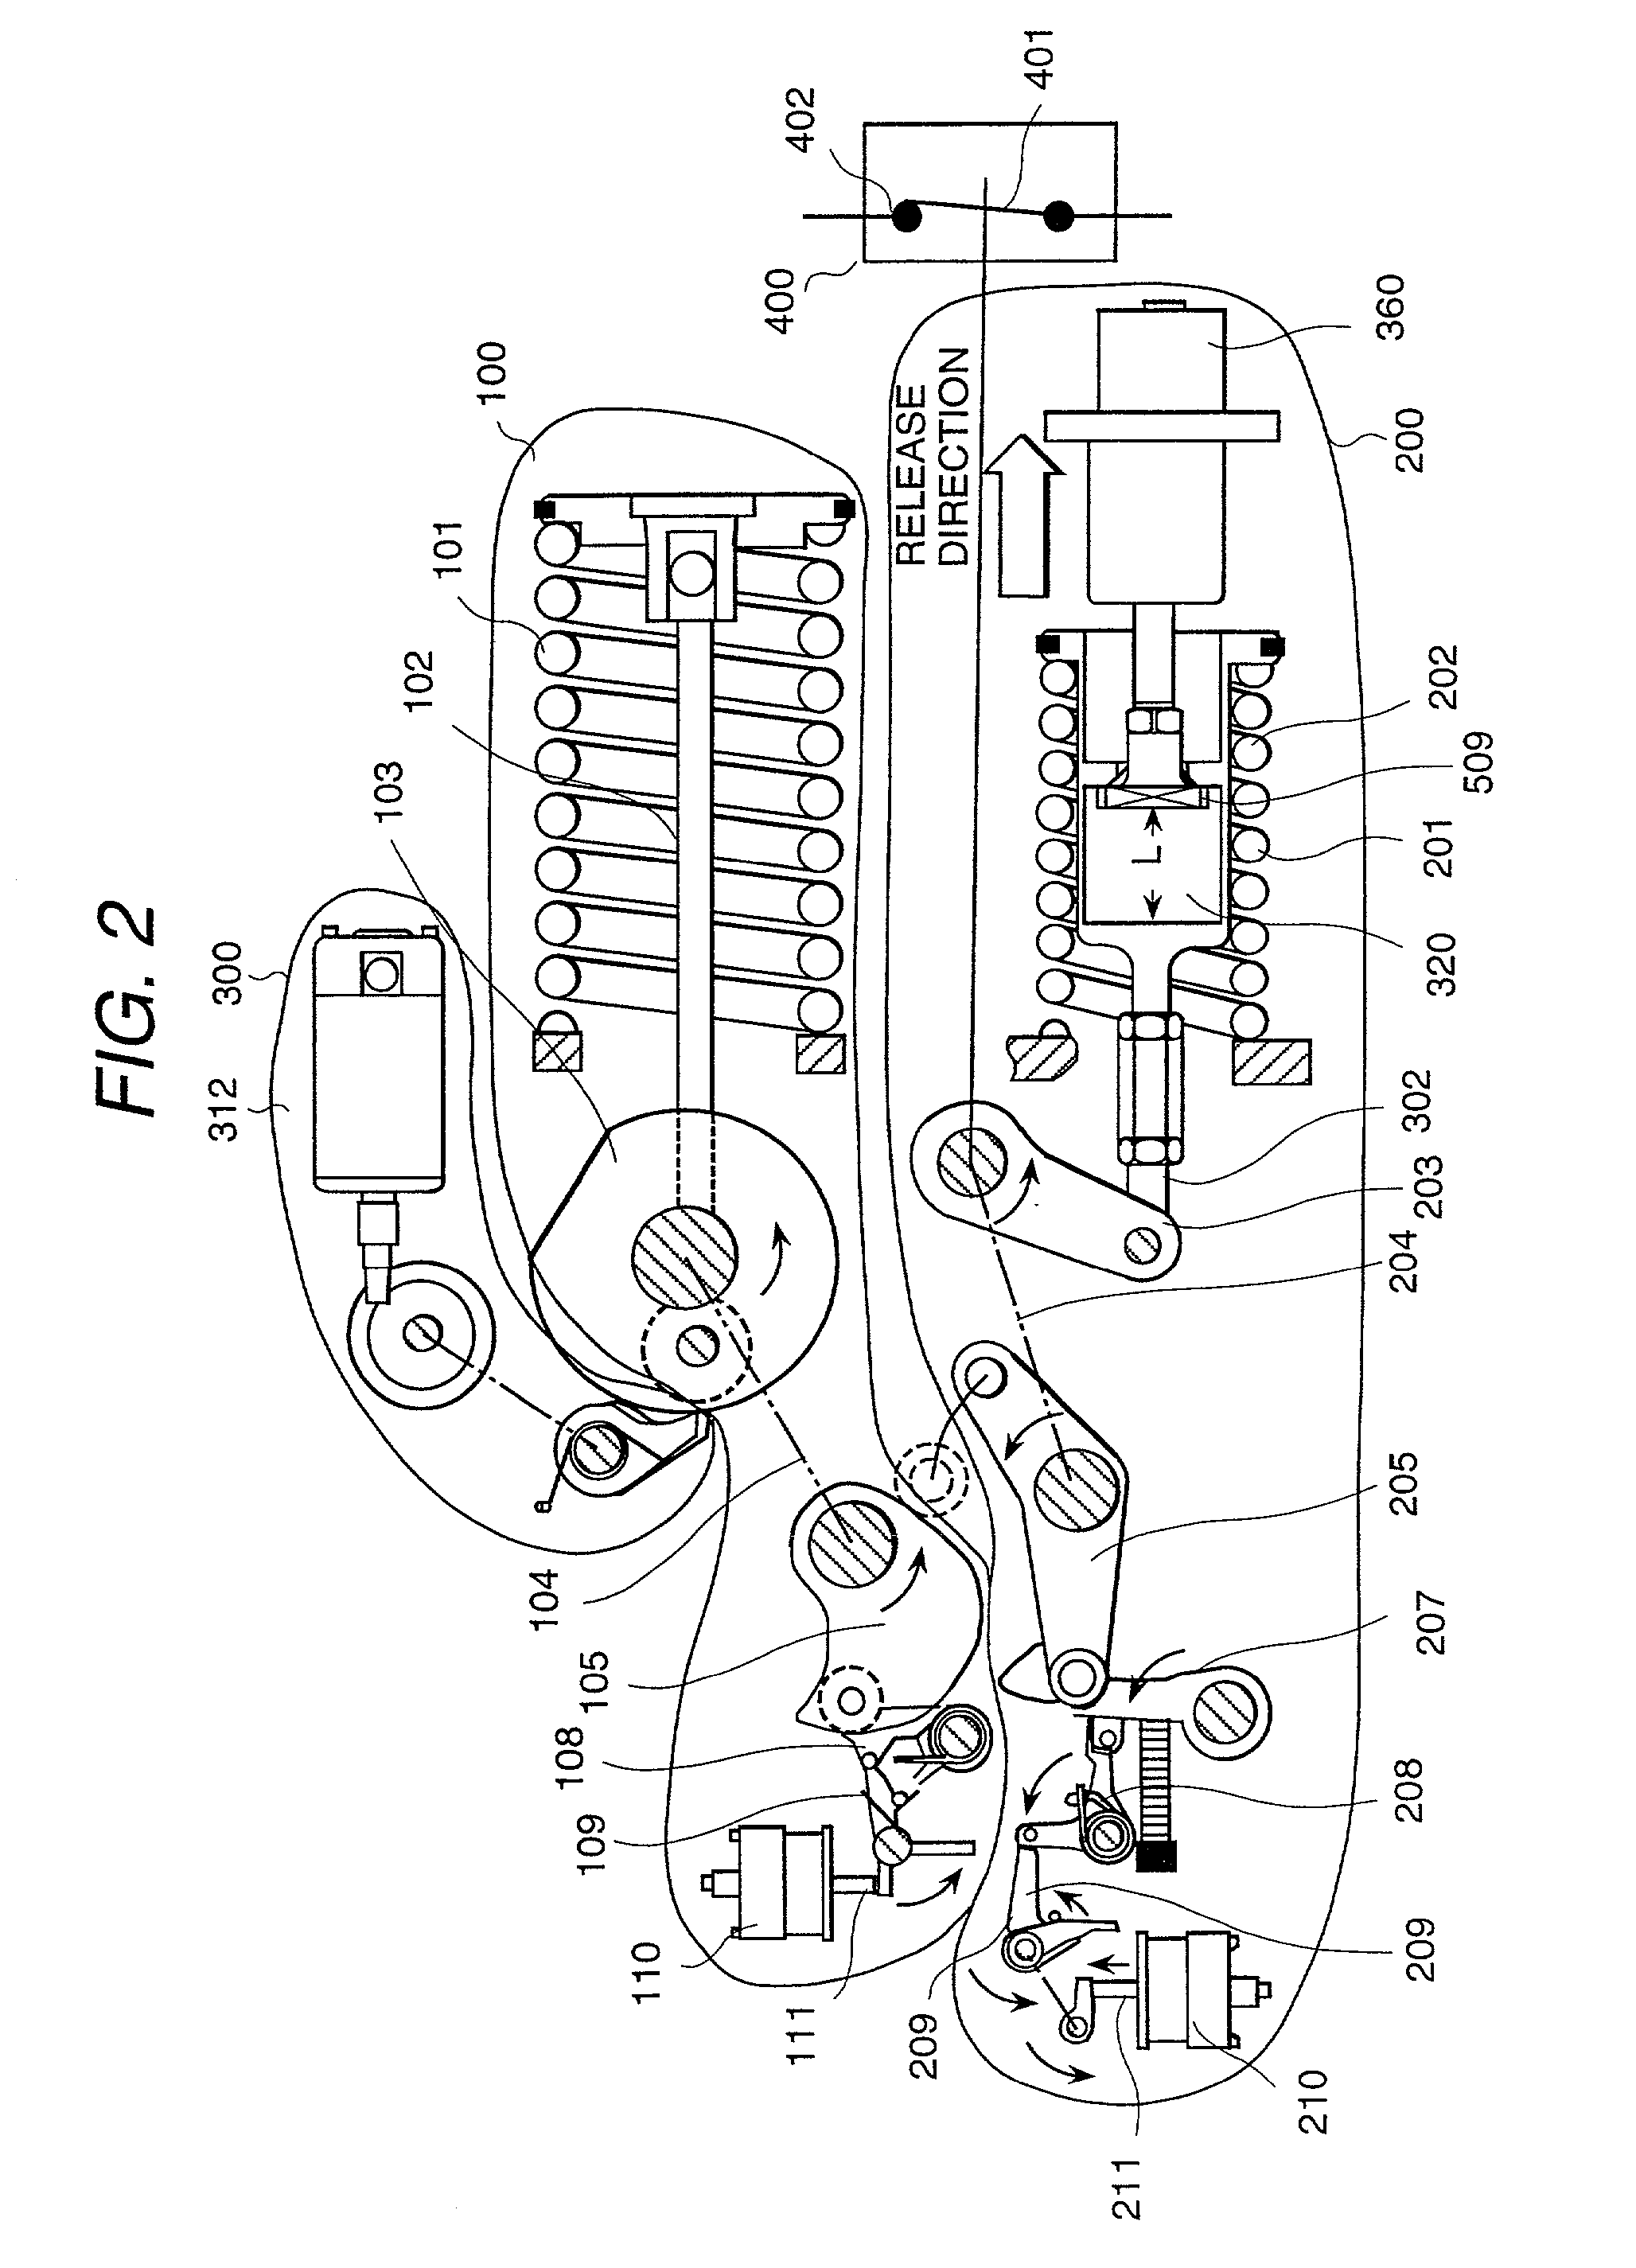 Gas-insulated switch